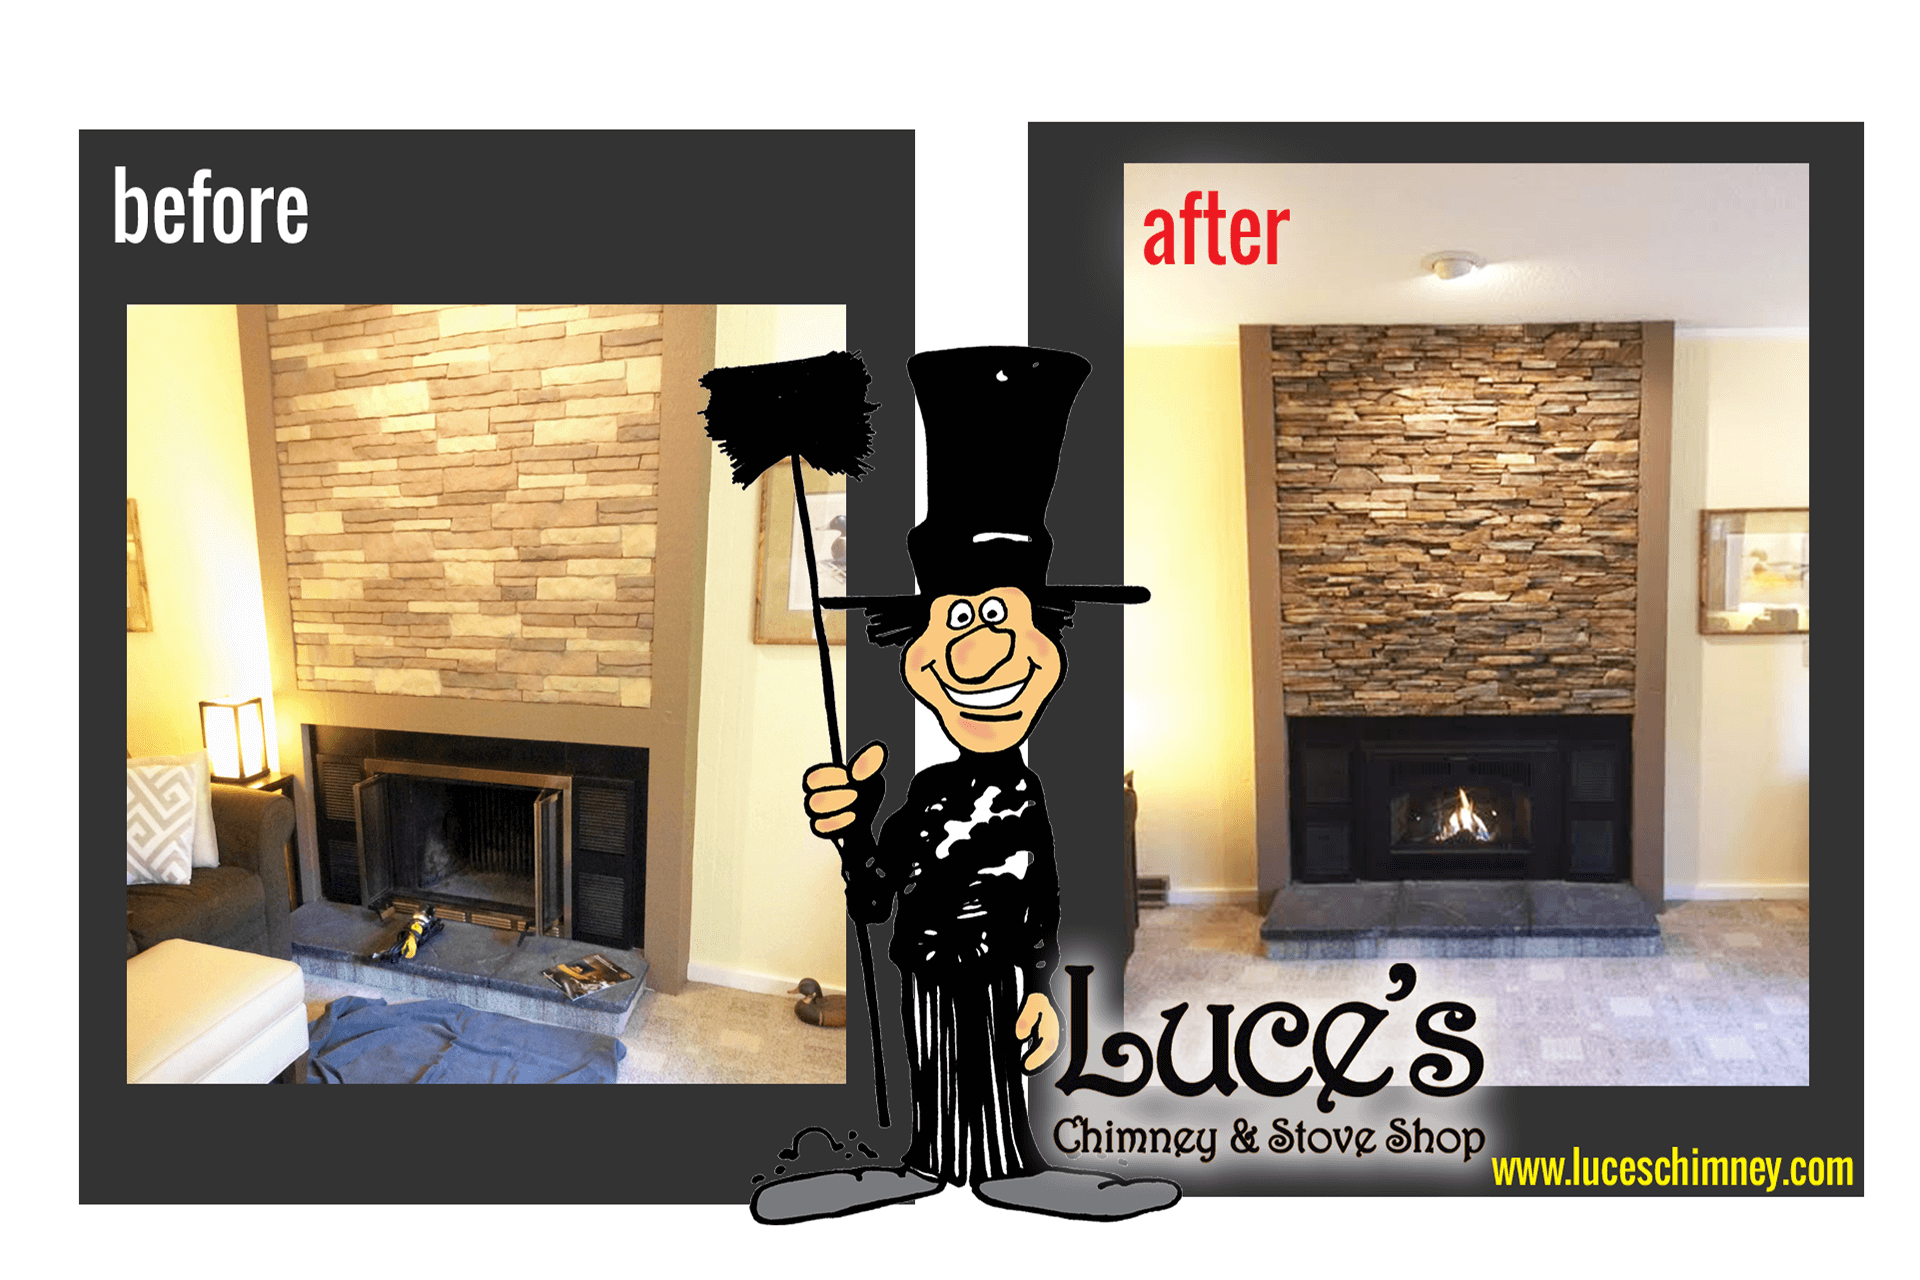 Fireplace updates, before and after fireplace remodeling and custom fireplace stonework by Luce's Chimney & Stove Shop in Swanton OH, serving Ohio, Michigan and Indiana.